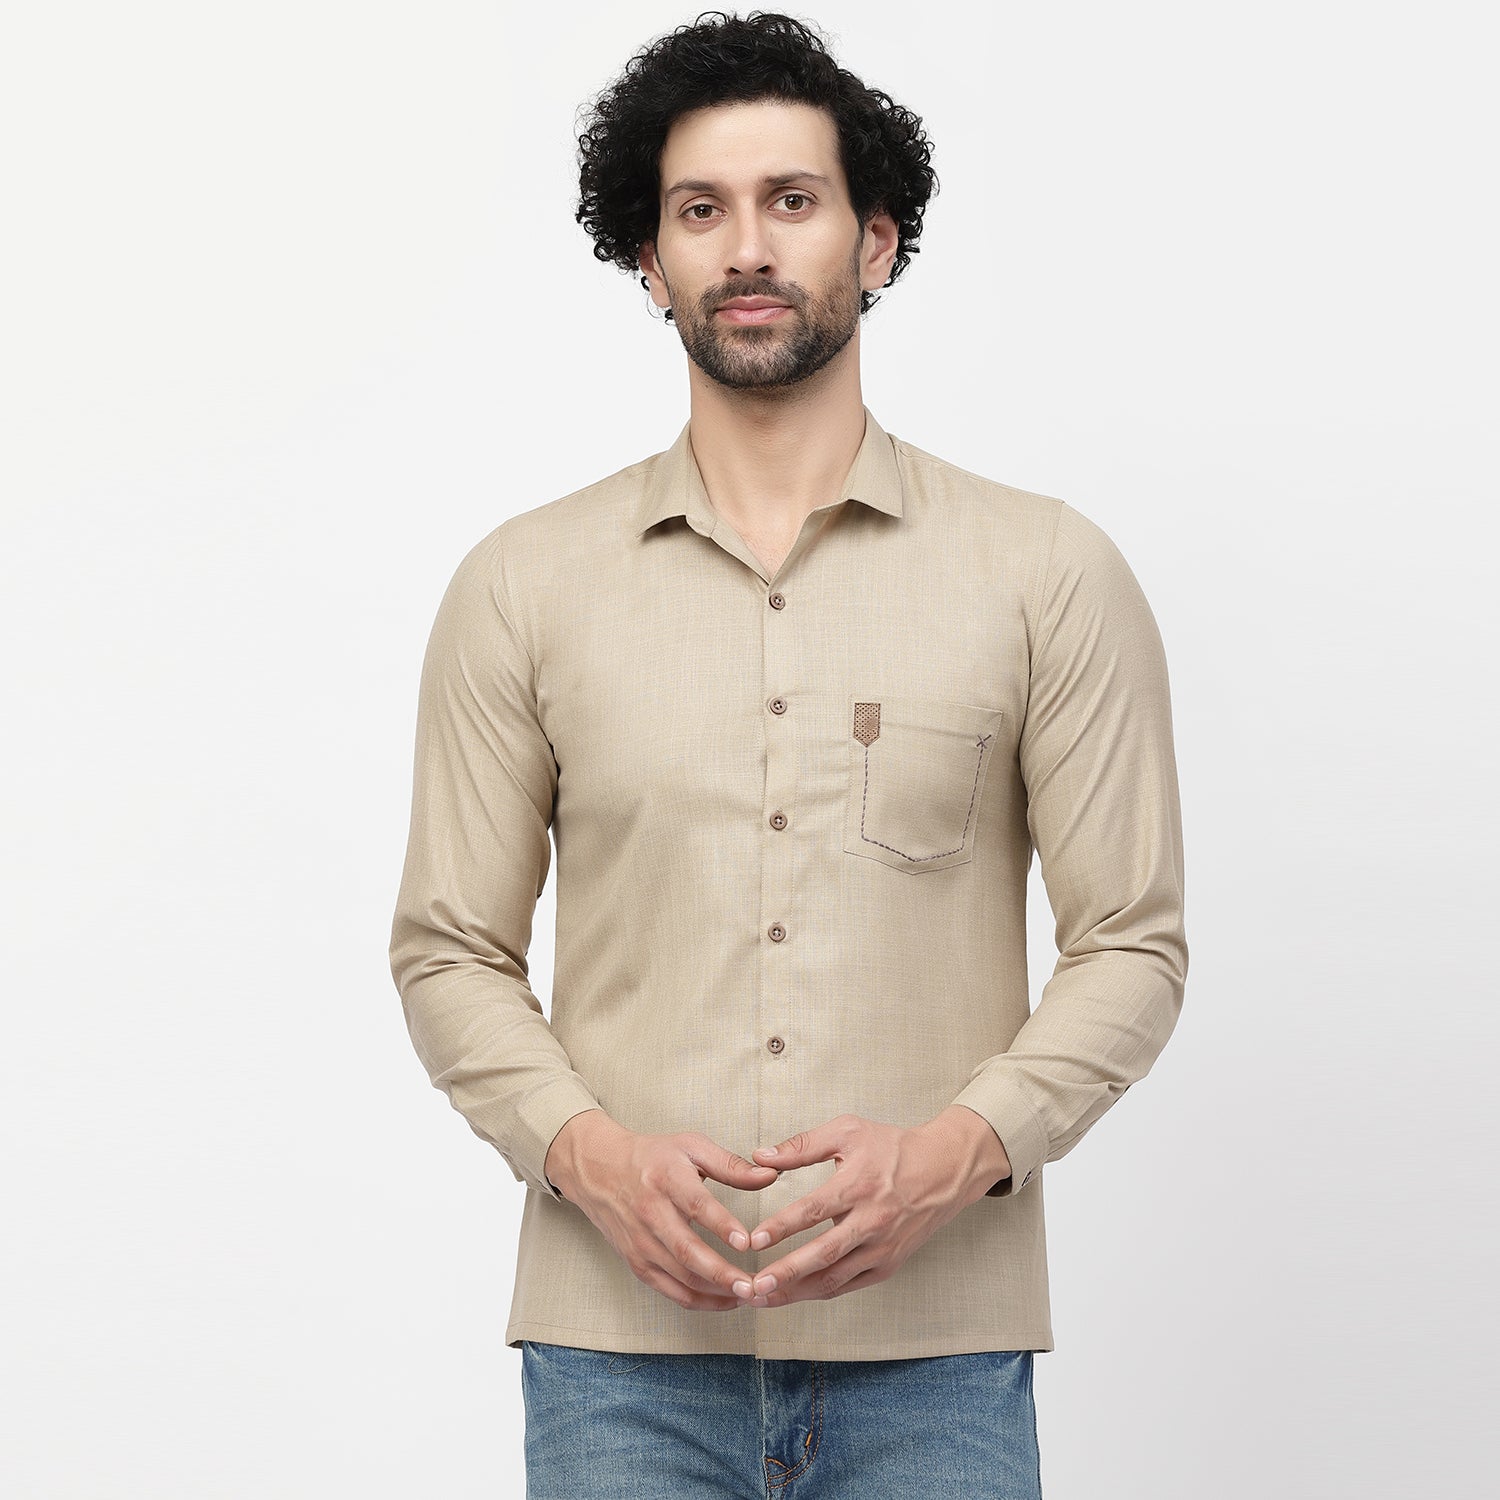 Linen Shirt With Pocket Details & Leather Patch